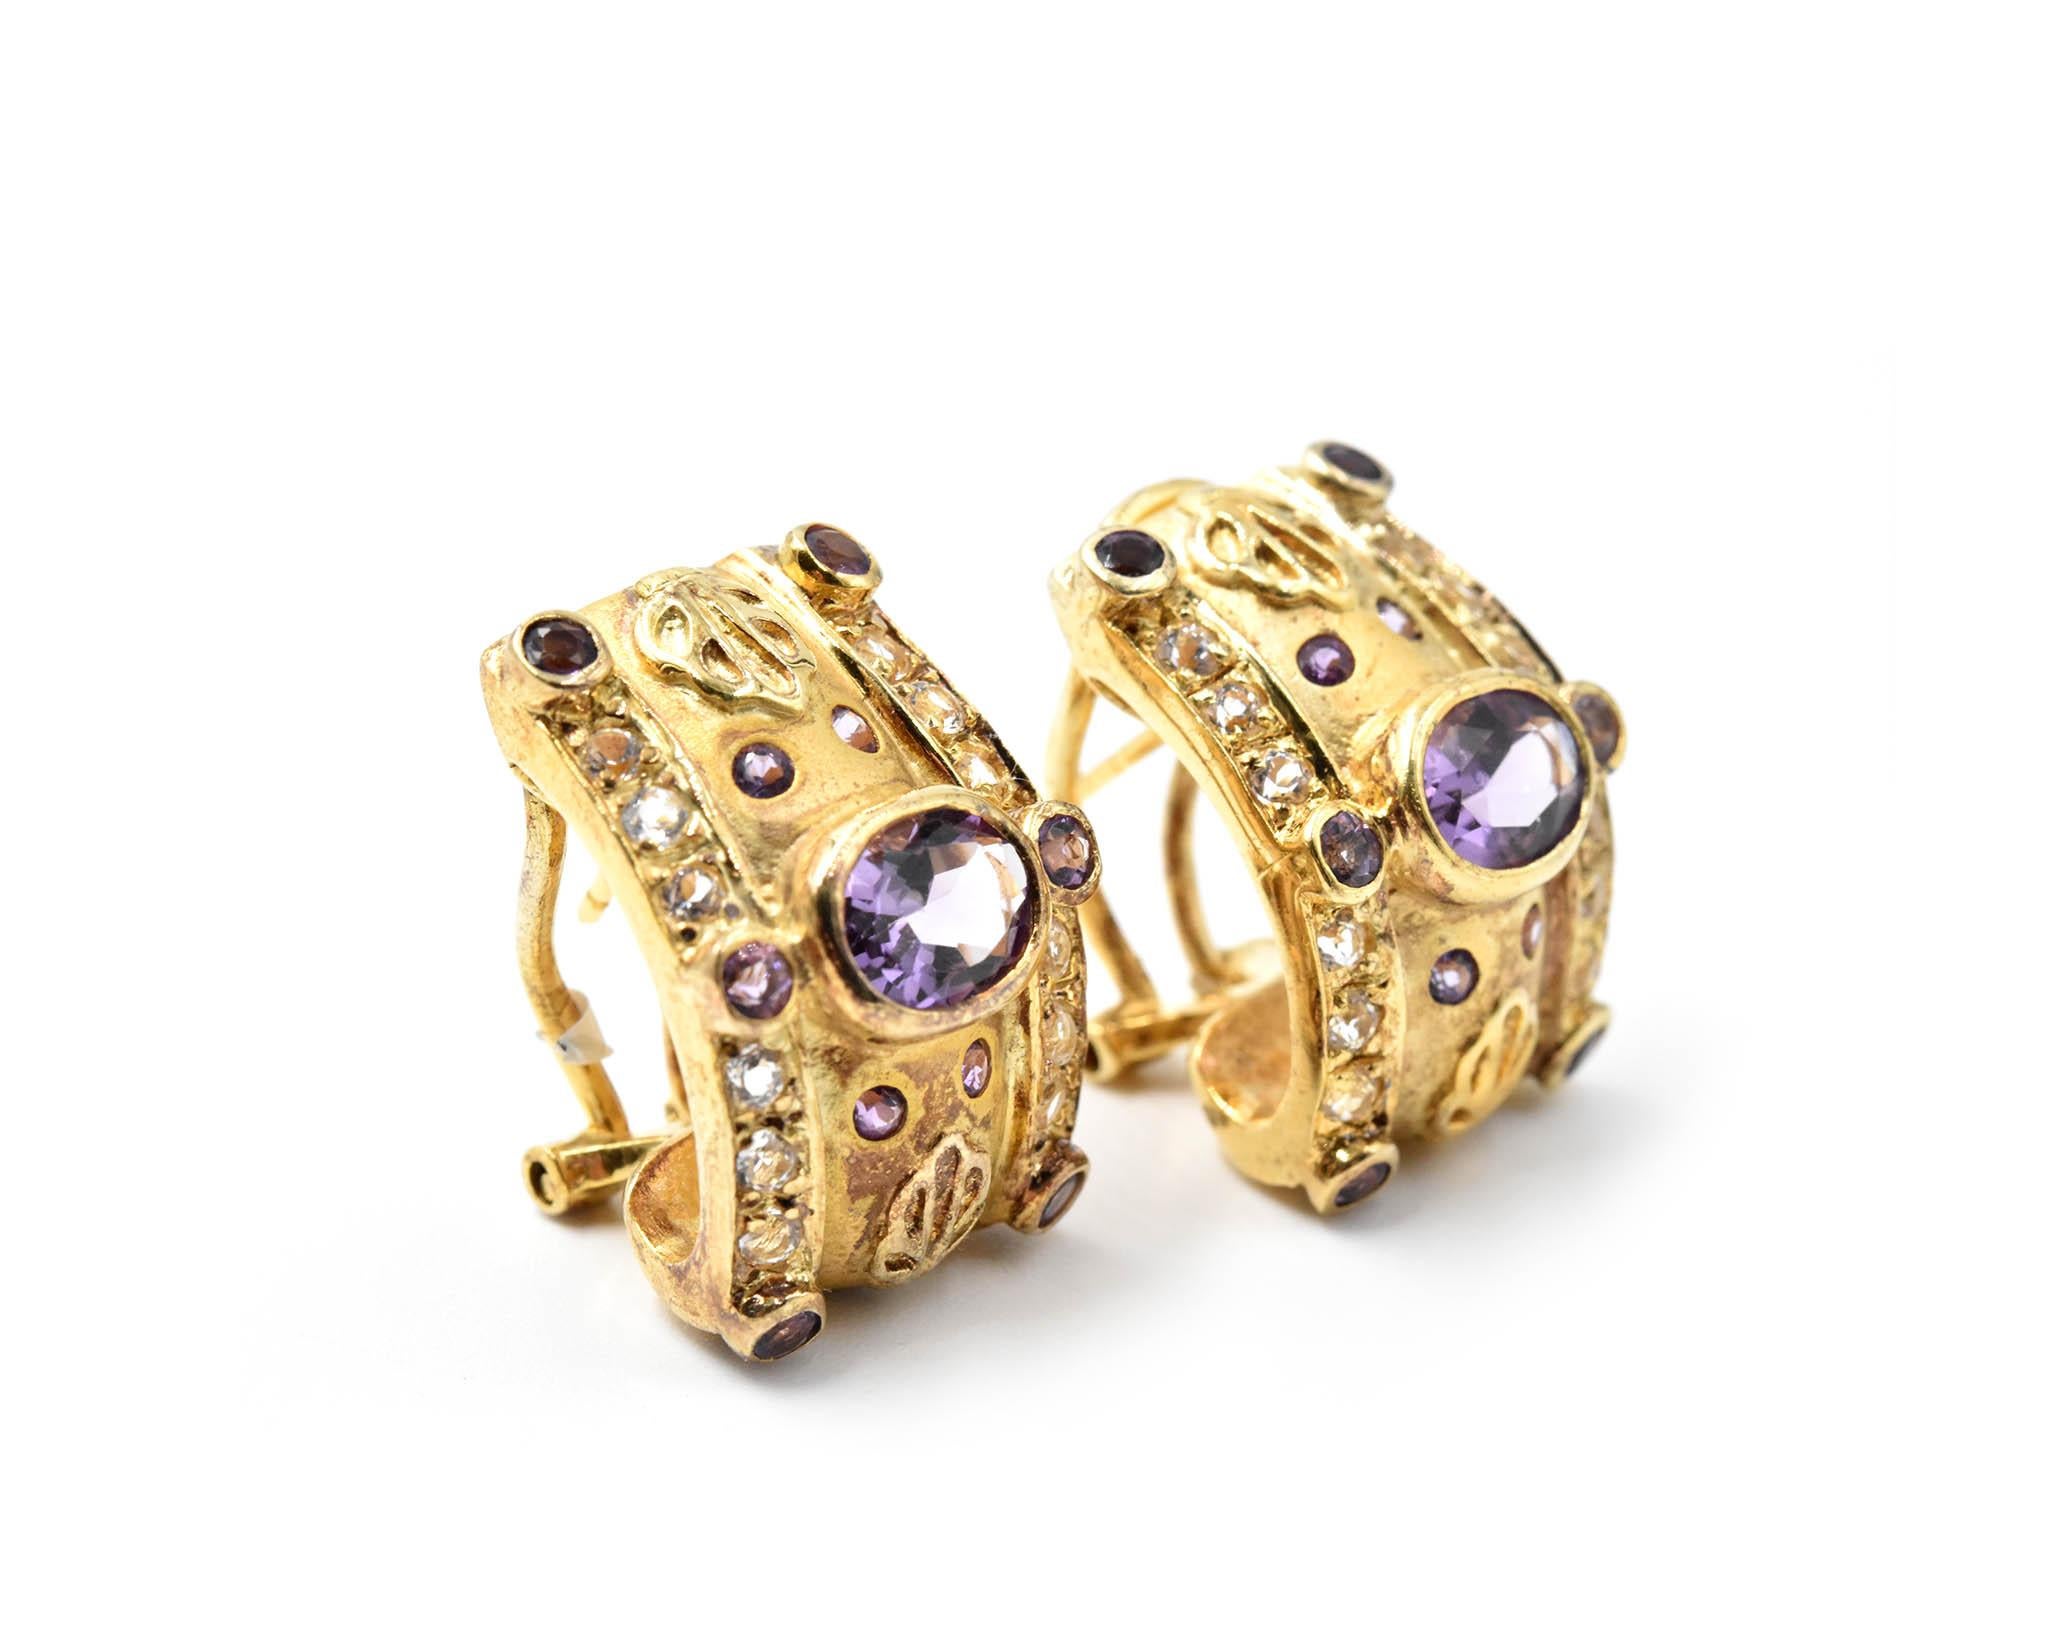 Designer: custom design
Material: sterling silver & gold plate
Amethyst: two oval cut 3.06 carat weight
White Topaz: 0.78 carat weight
Fastenings: omega clip
Weight: 18.92 grams
